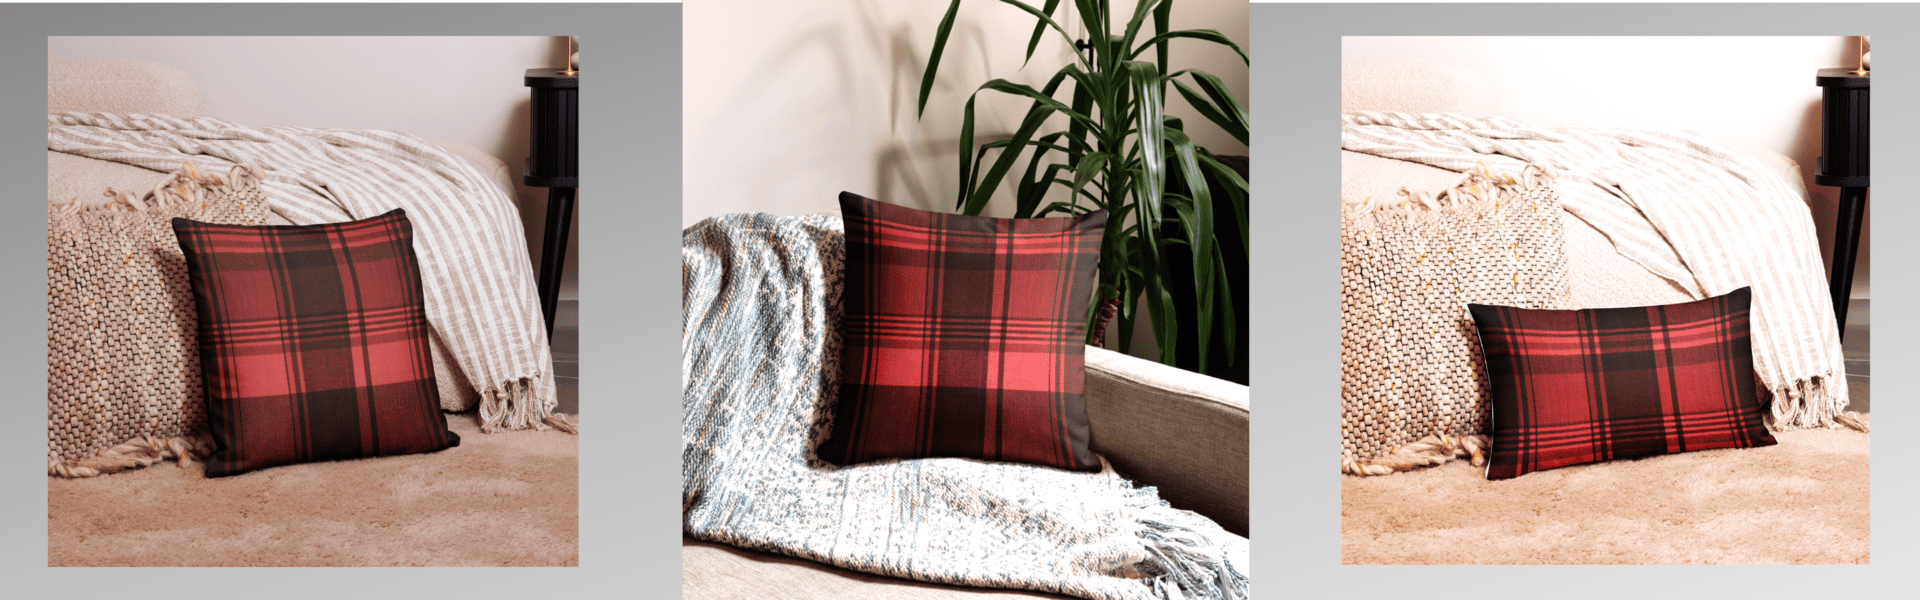 Red and black plaid throw pillow on couch.